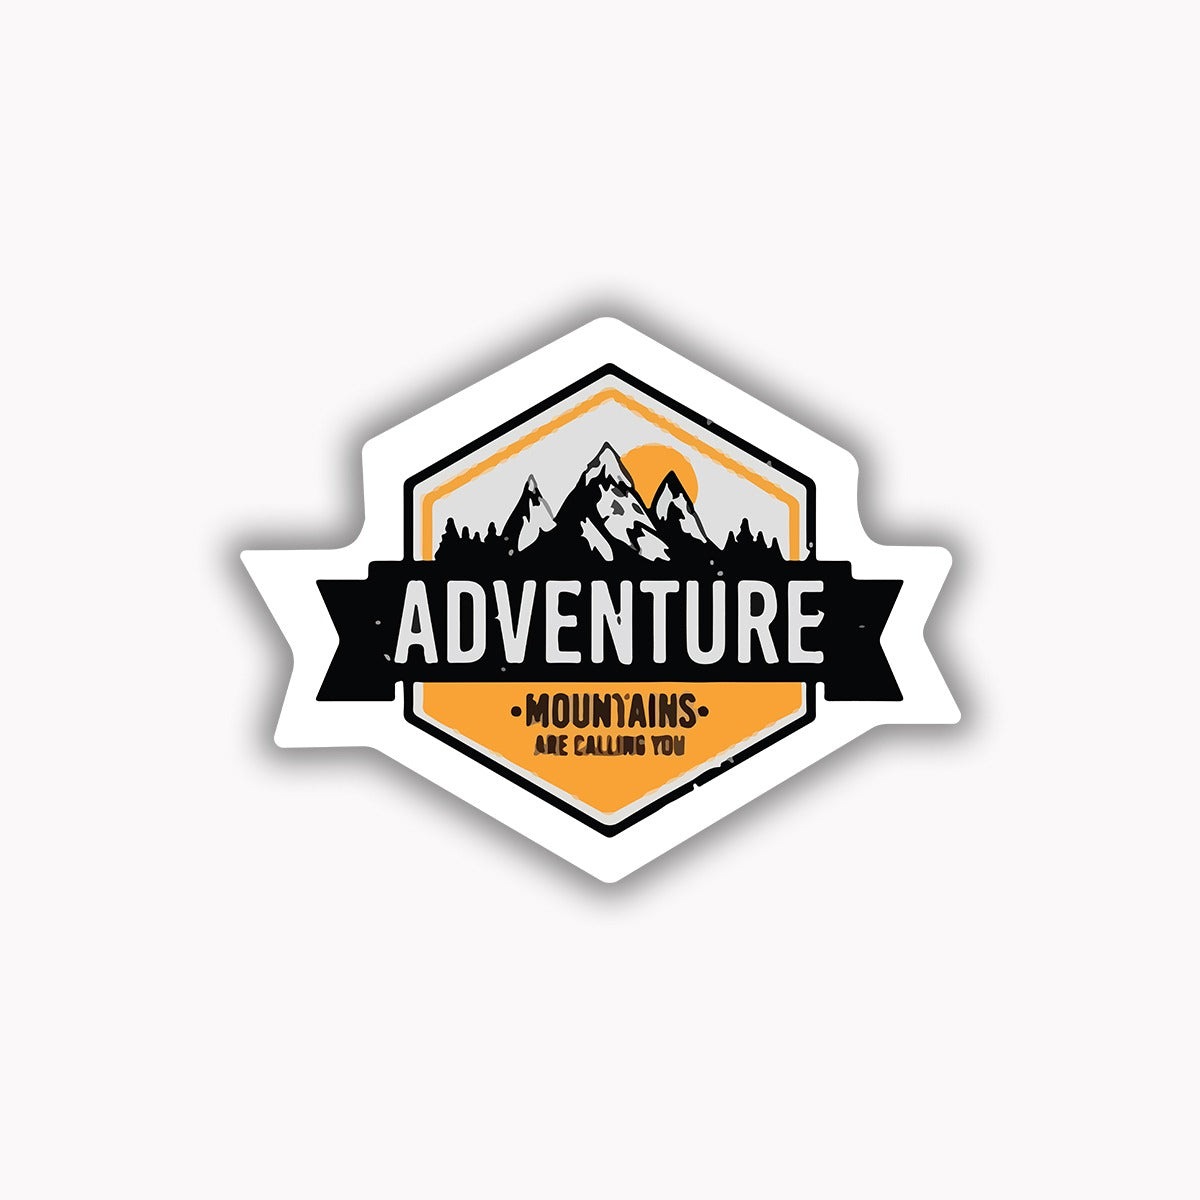 Adventure mountains are calling you